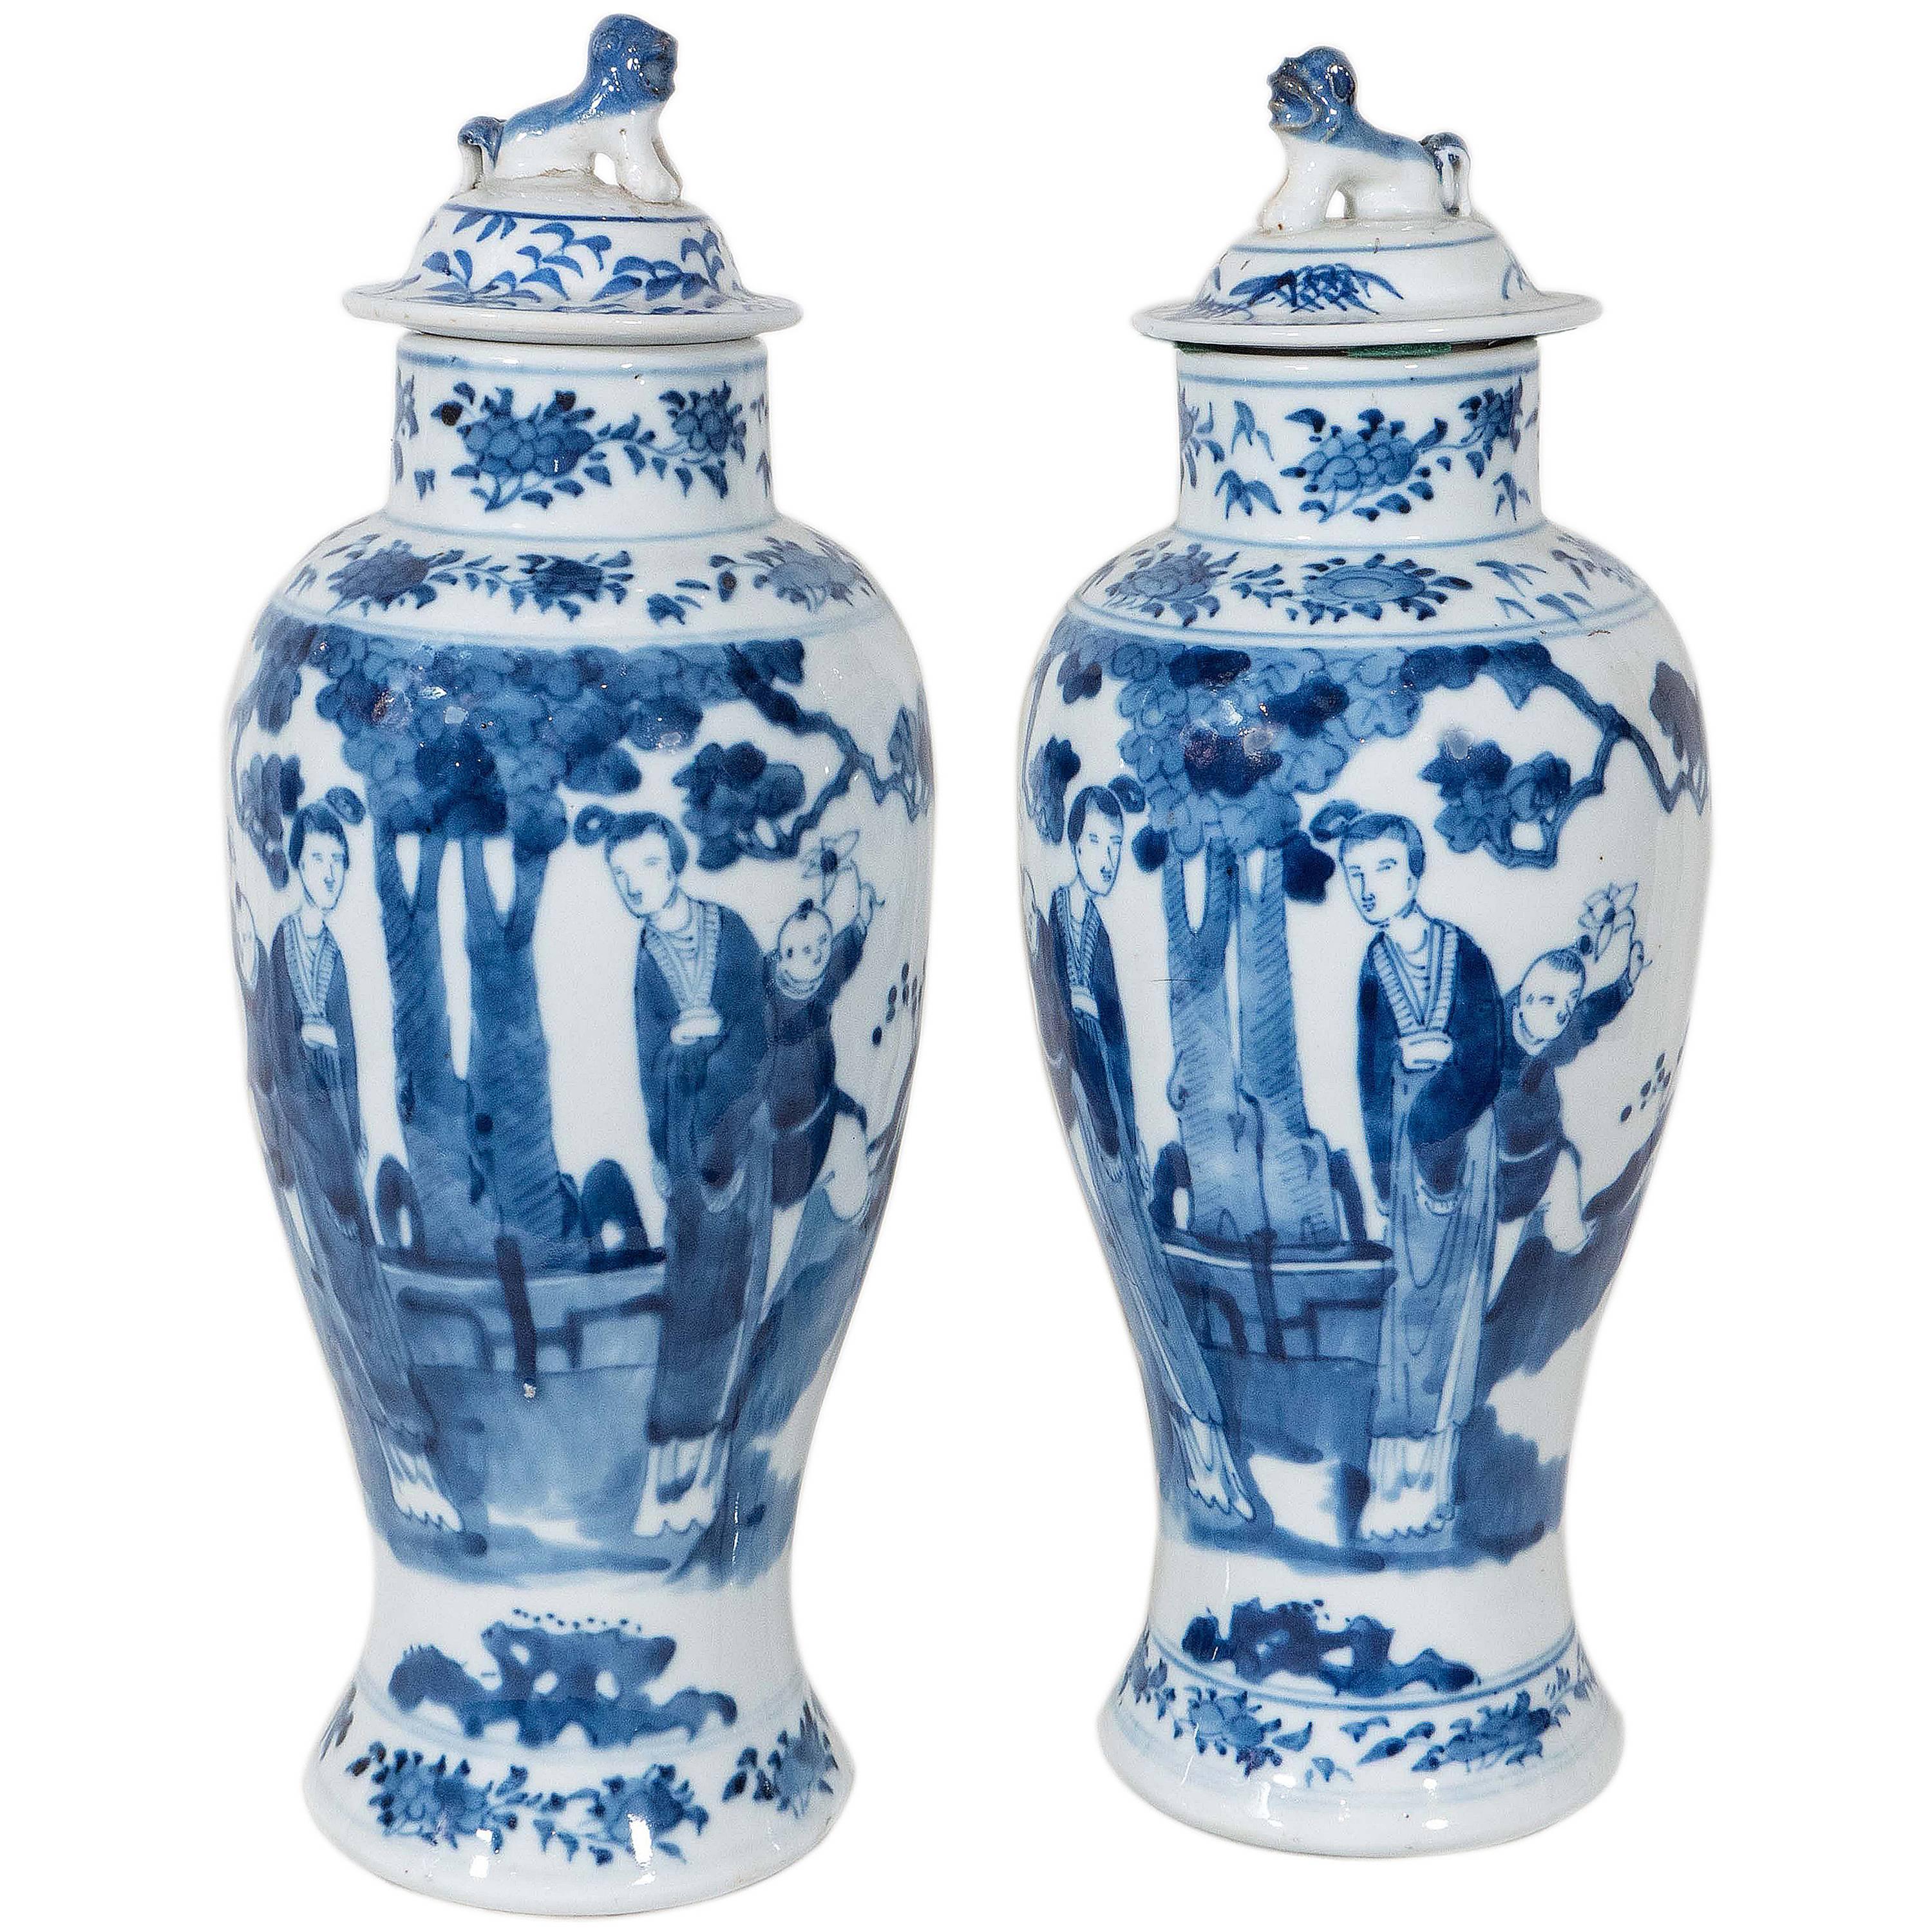 Pair of Blue and White Antique Chinese Porcelain Covered Vases